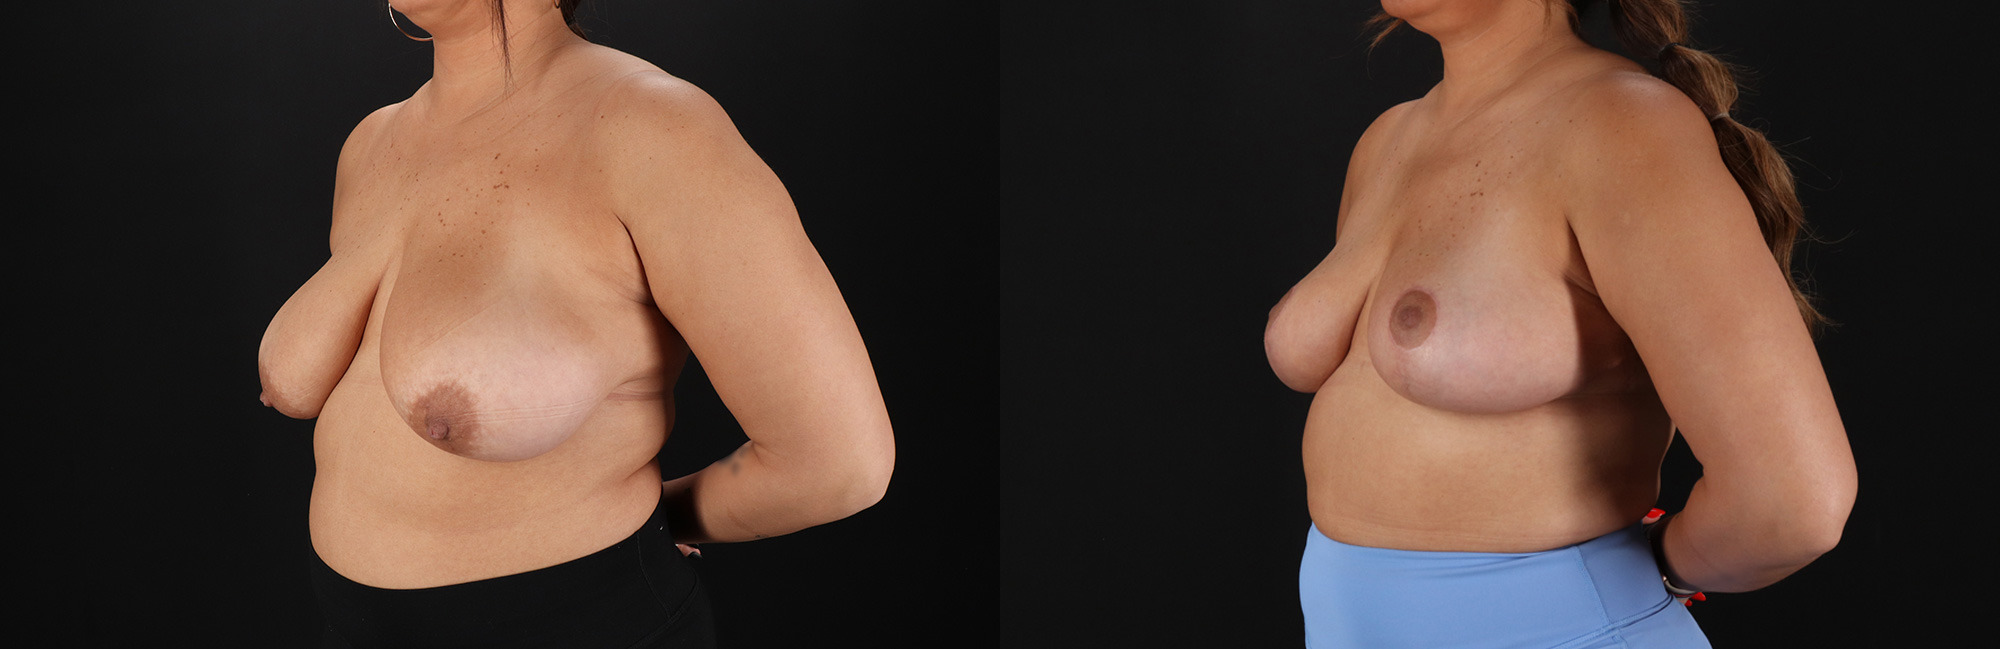 Breast Reduction before and after photo by Dr. Erika A. Sato in Houston, TX